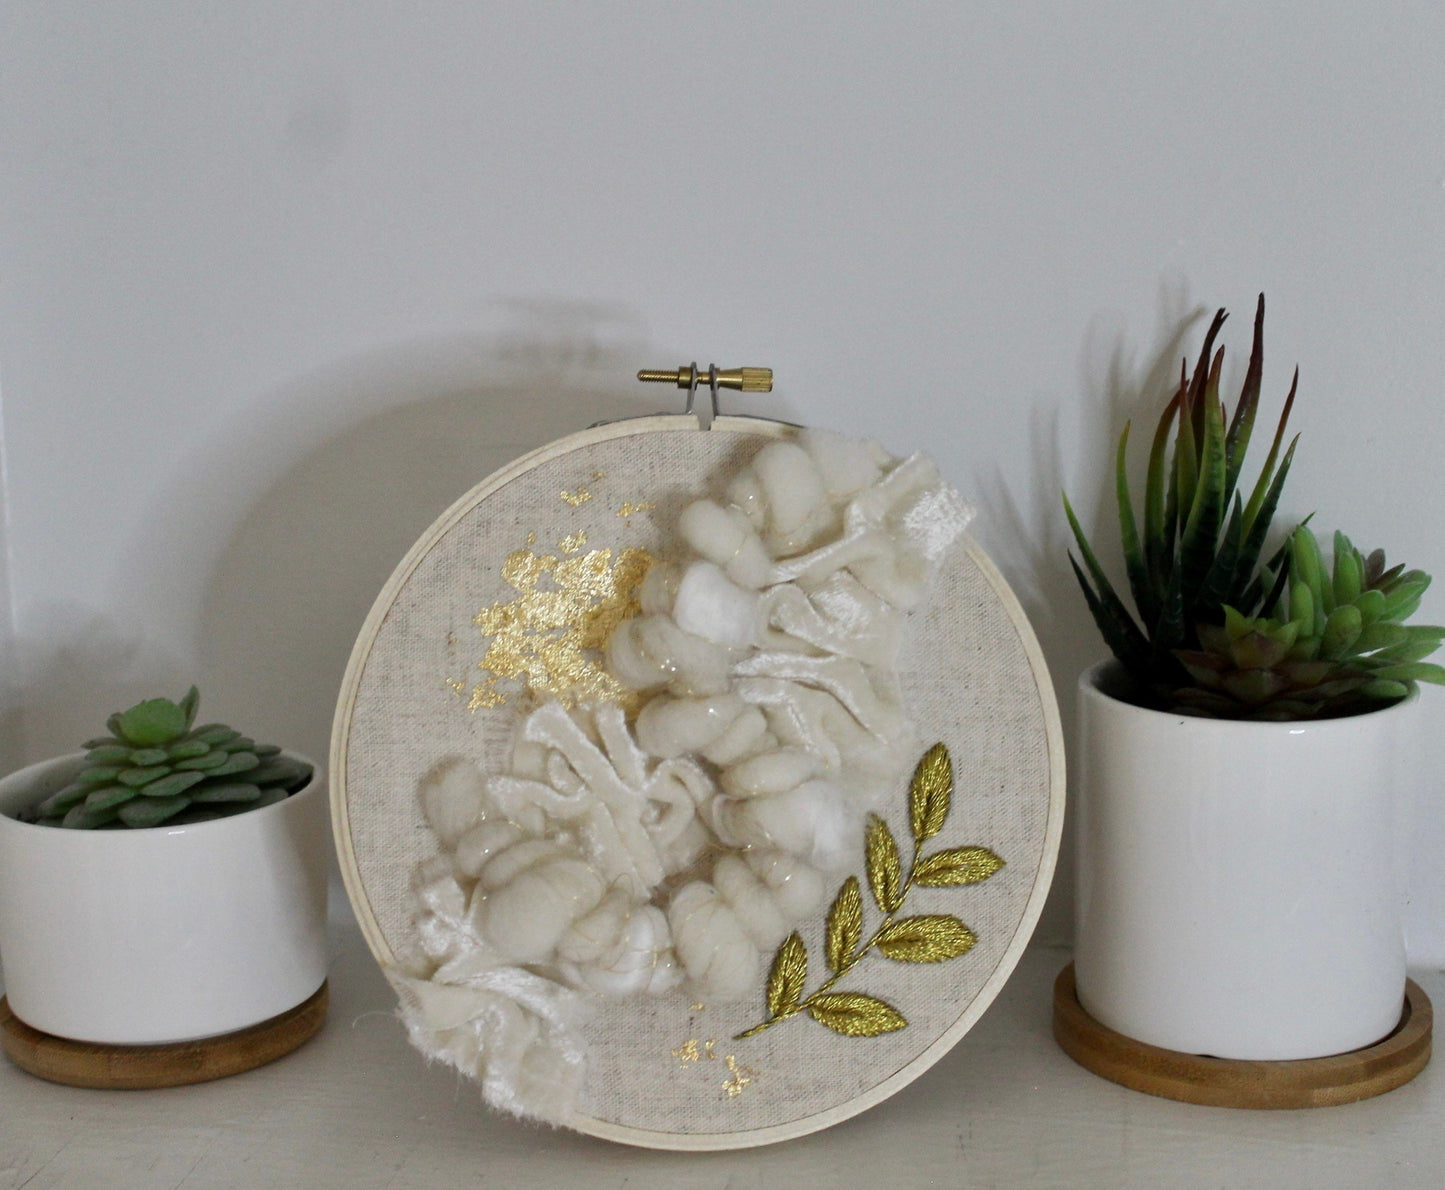 White and gold embroidery | embroidery hoop | foil embroidery | diy | gift idea | flower